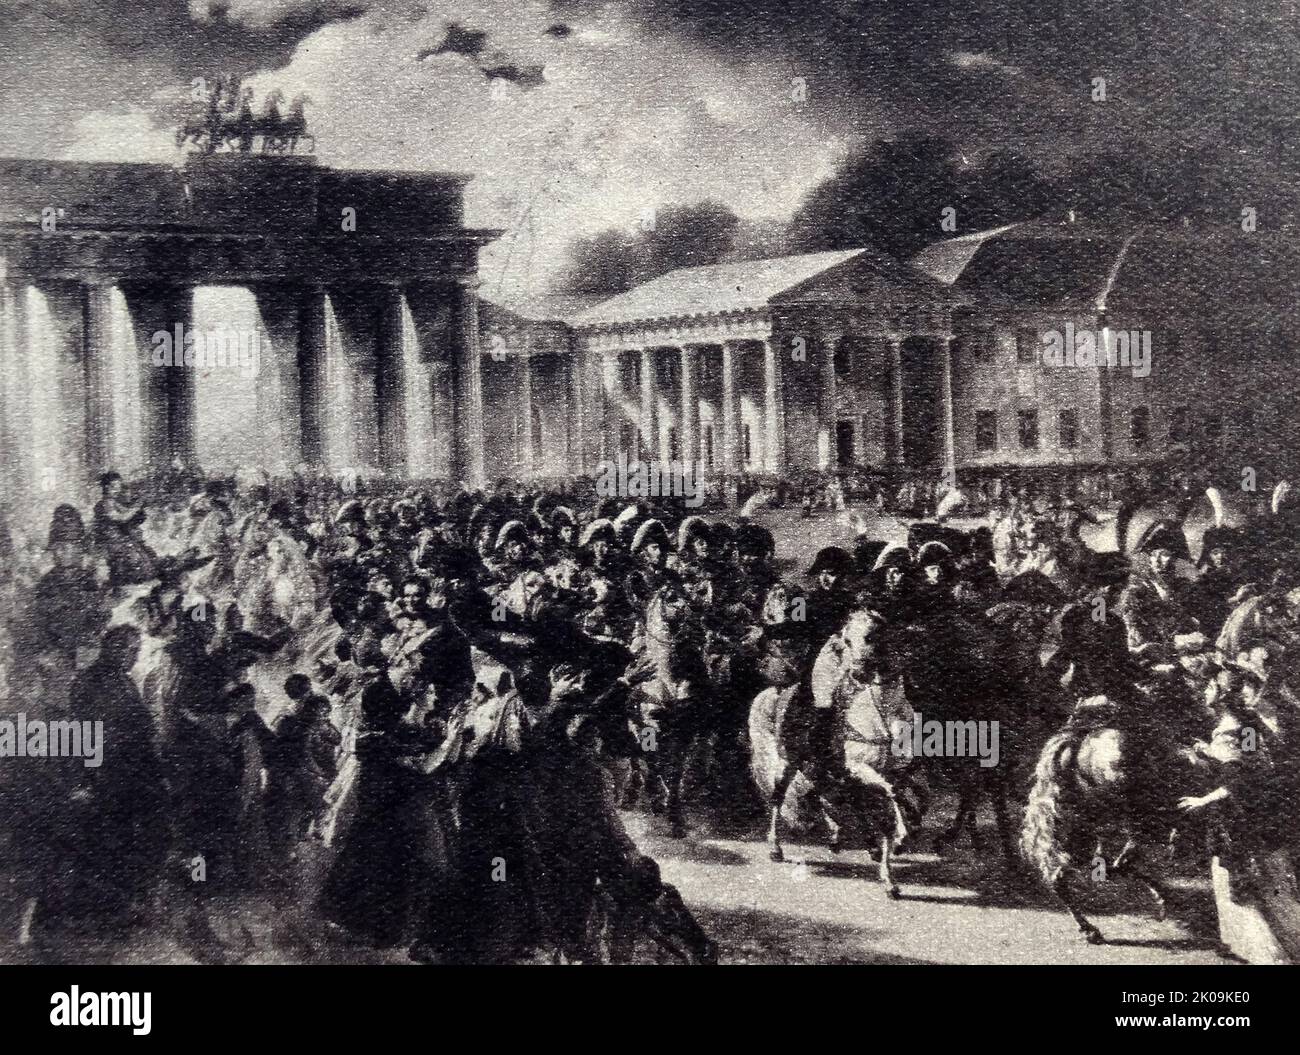 Napoleon enters Berlin, 1806. The Fall of Berlin took place on 27 October 1806 when the Prussian capital of Berlin was captured by French forces in the aftermath of the Battle of Jena-Auerstedt. The French Emperor Napoleon Bonaparte entered the city, from which he issued his Berlin Decree implementing his Continental System. Large-scale plundering of Berlin took place. Stock Photo